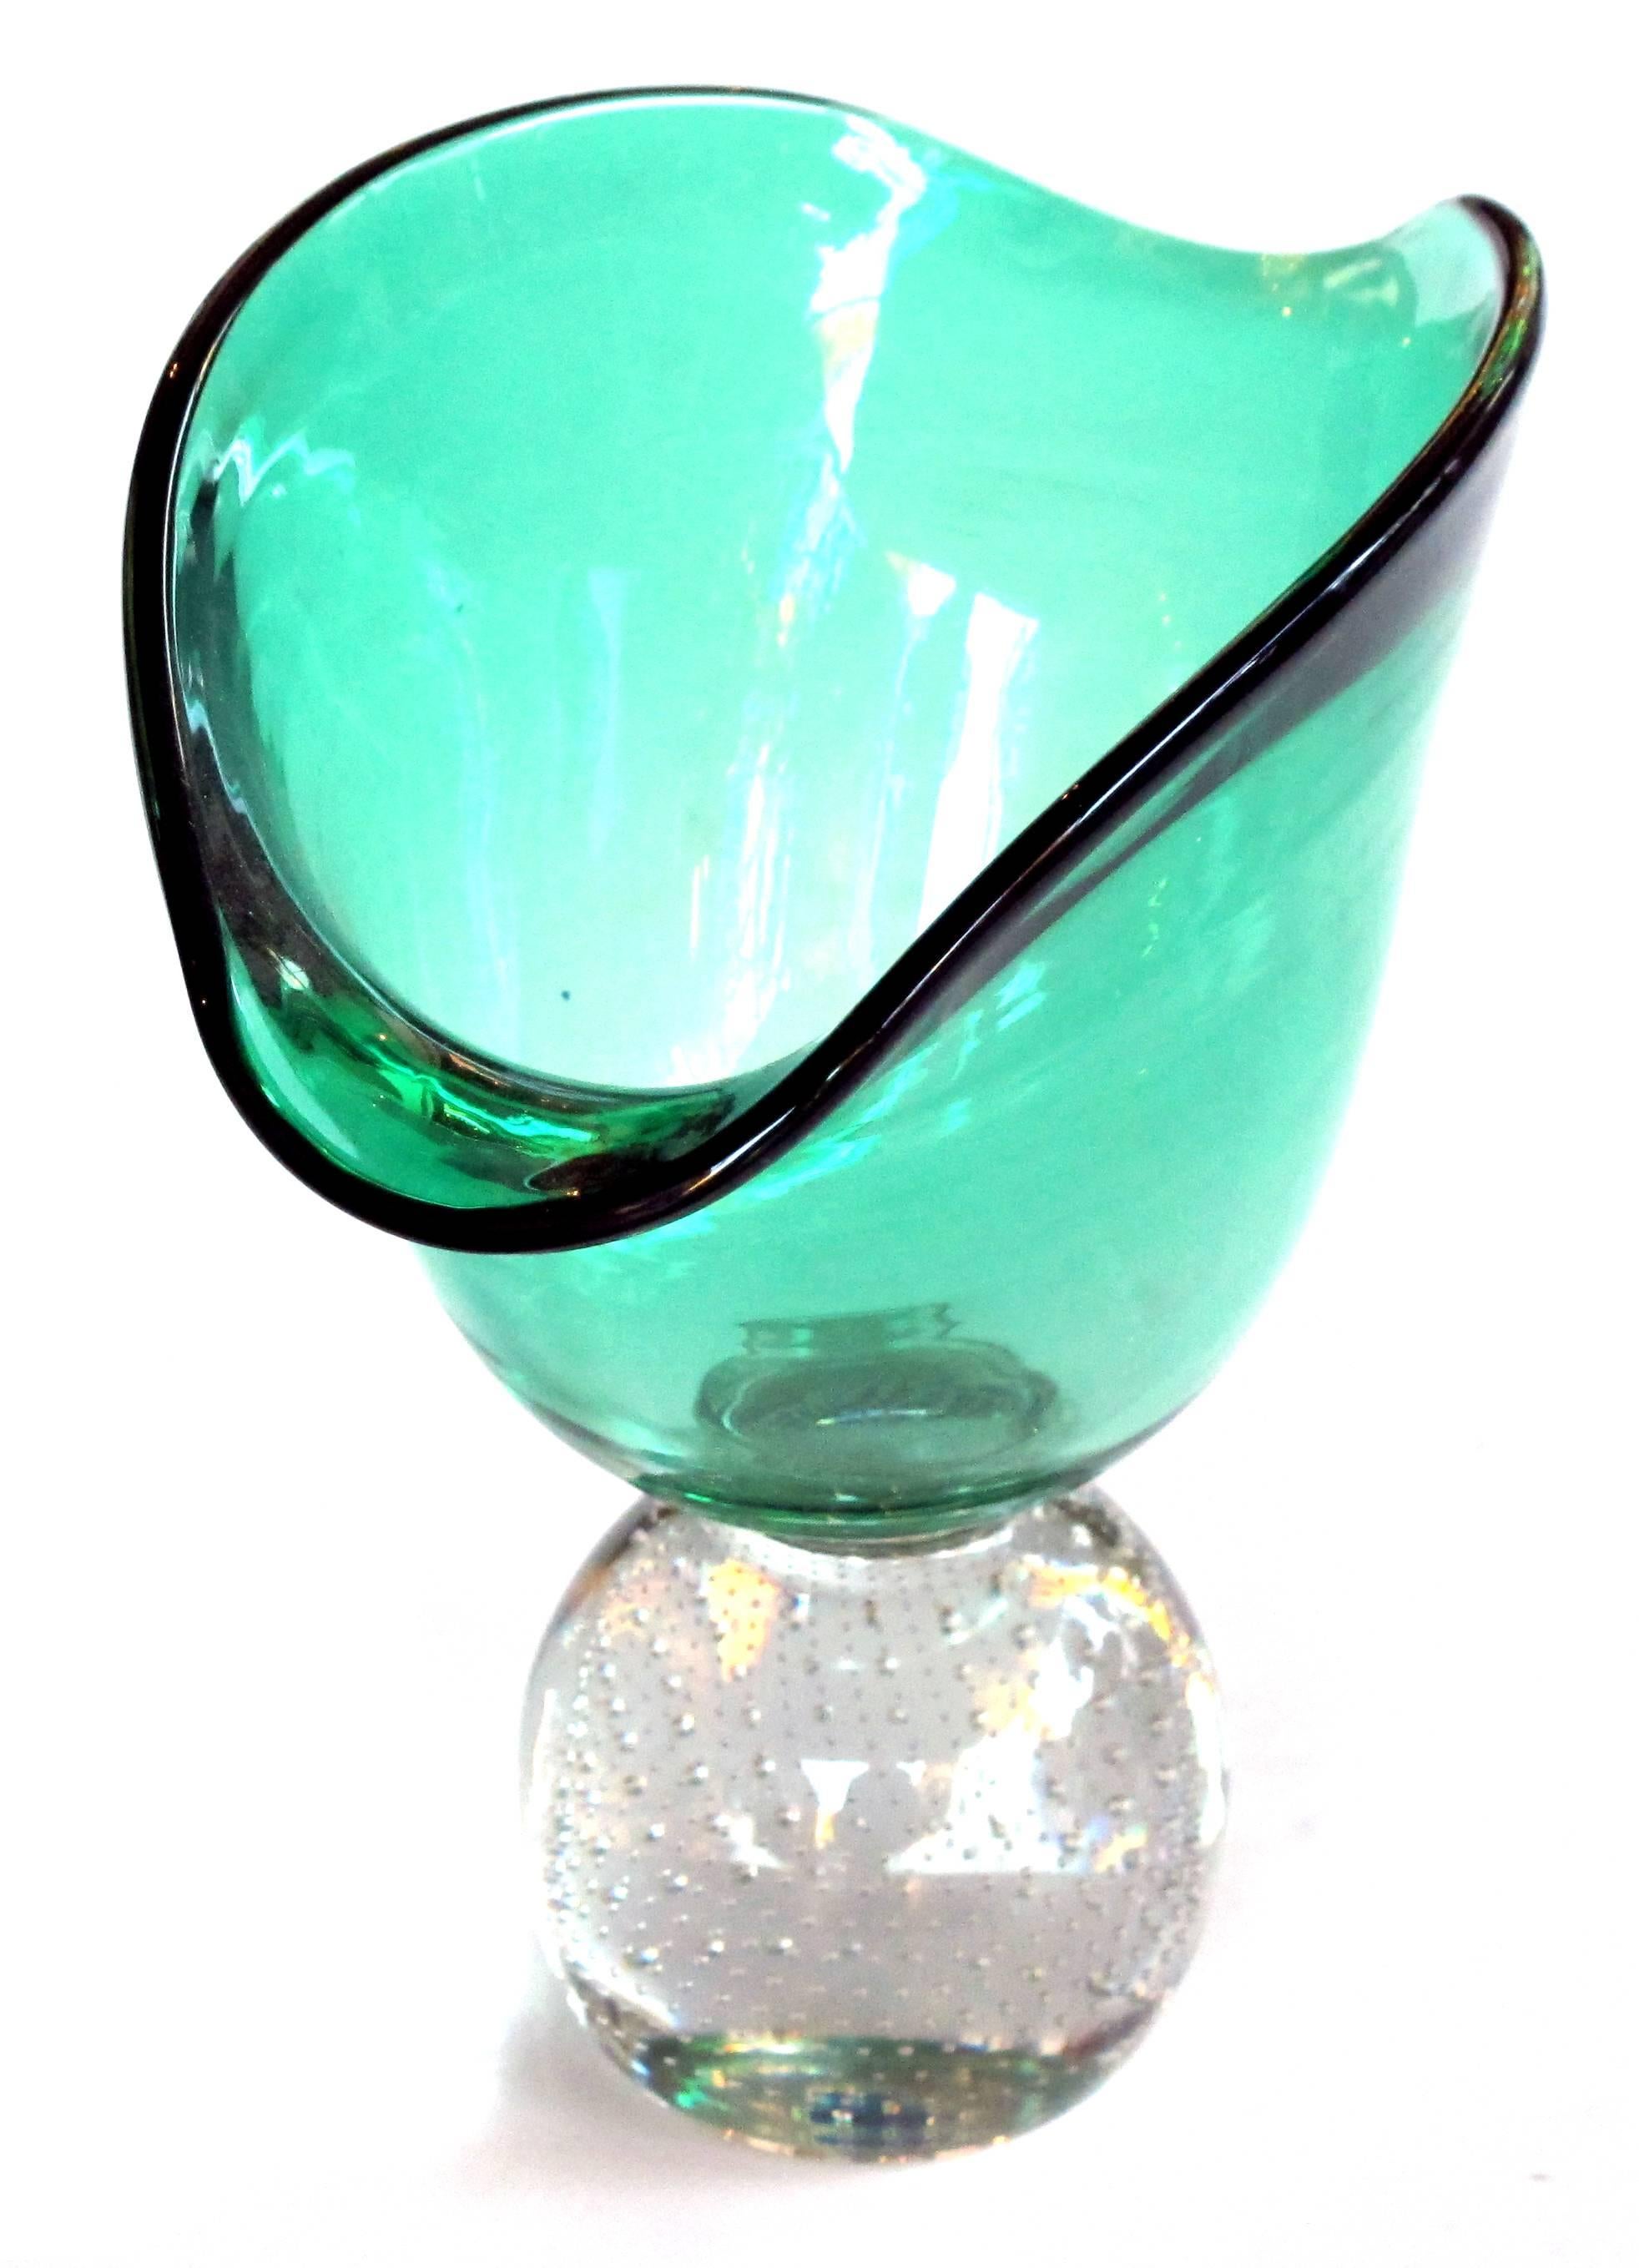 A shapely and good quality American Mid-Century emerald-green pedestal base by Pairpoint Glassworks; the heavy vase with pinched mouth raised on a clear glass sphere with controlled bubbles; of superb retro design and craftsmanship.